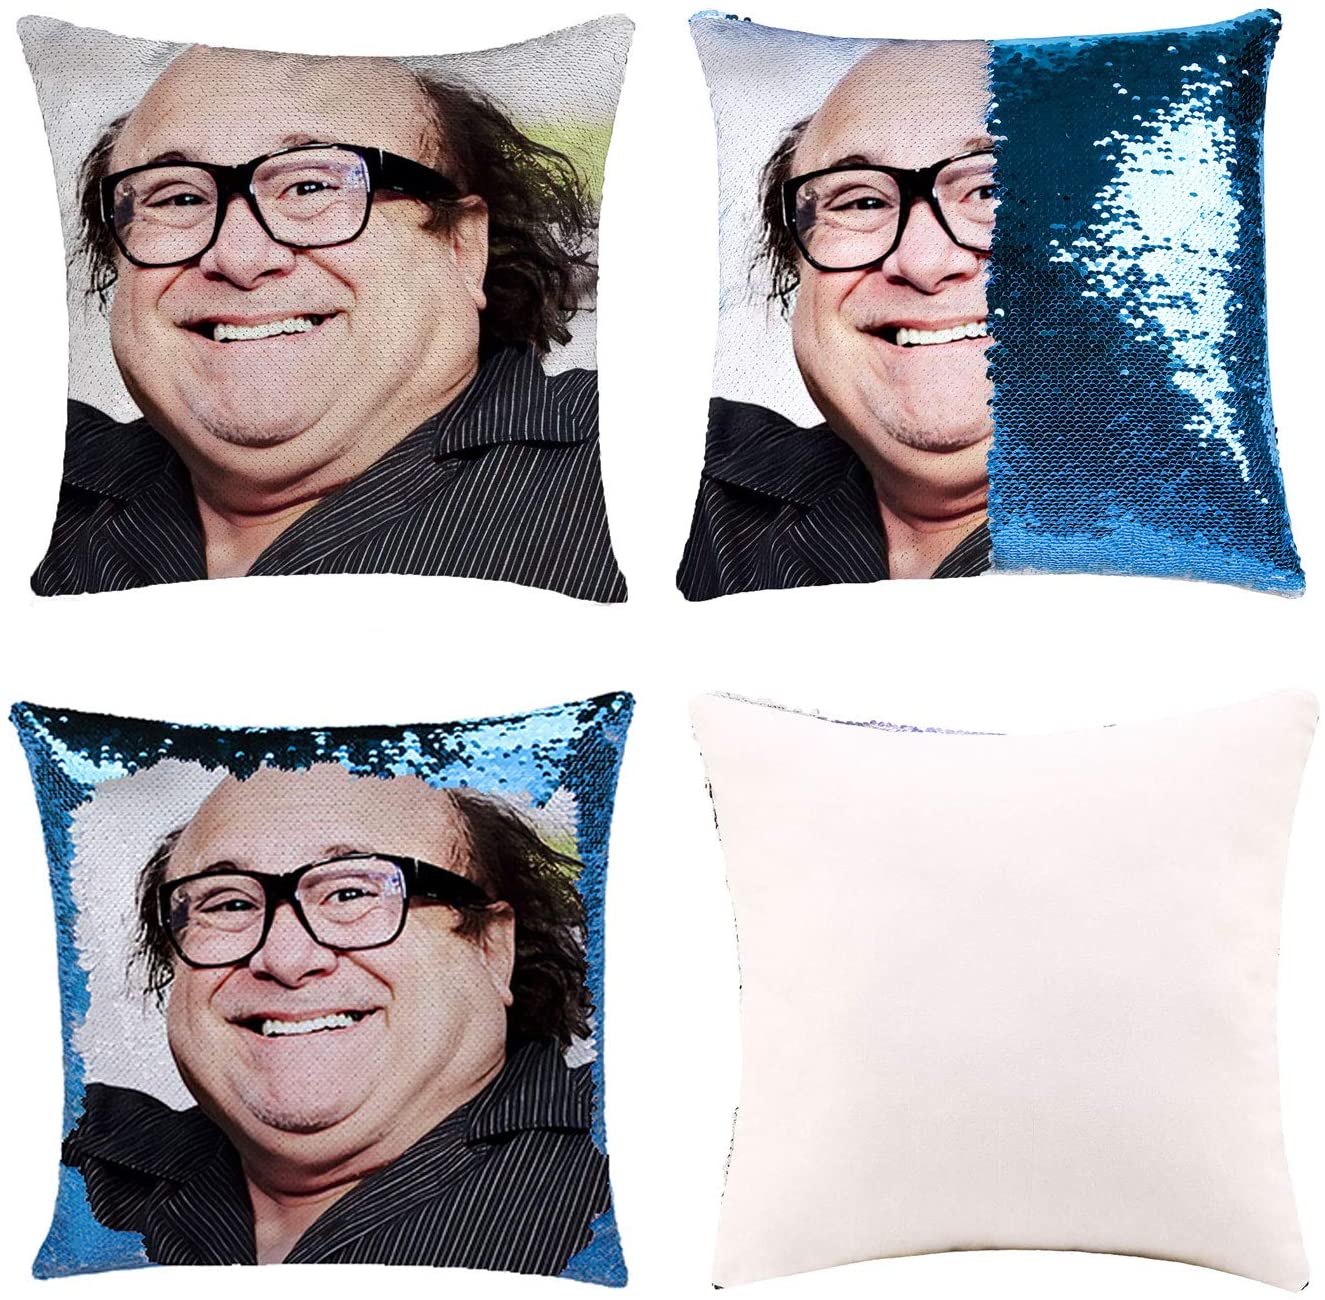 K T One Funny DIY Sequin Pillows Cover Danny Devito Face Magic Reversible Throw Pillow Cover Decorative Change Color Pillowcase 16x16 (Gold) (Danny 3 Blue)